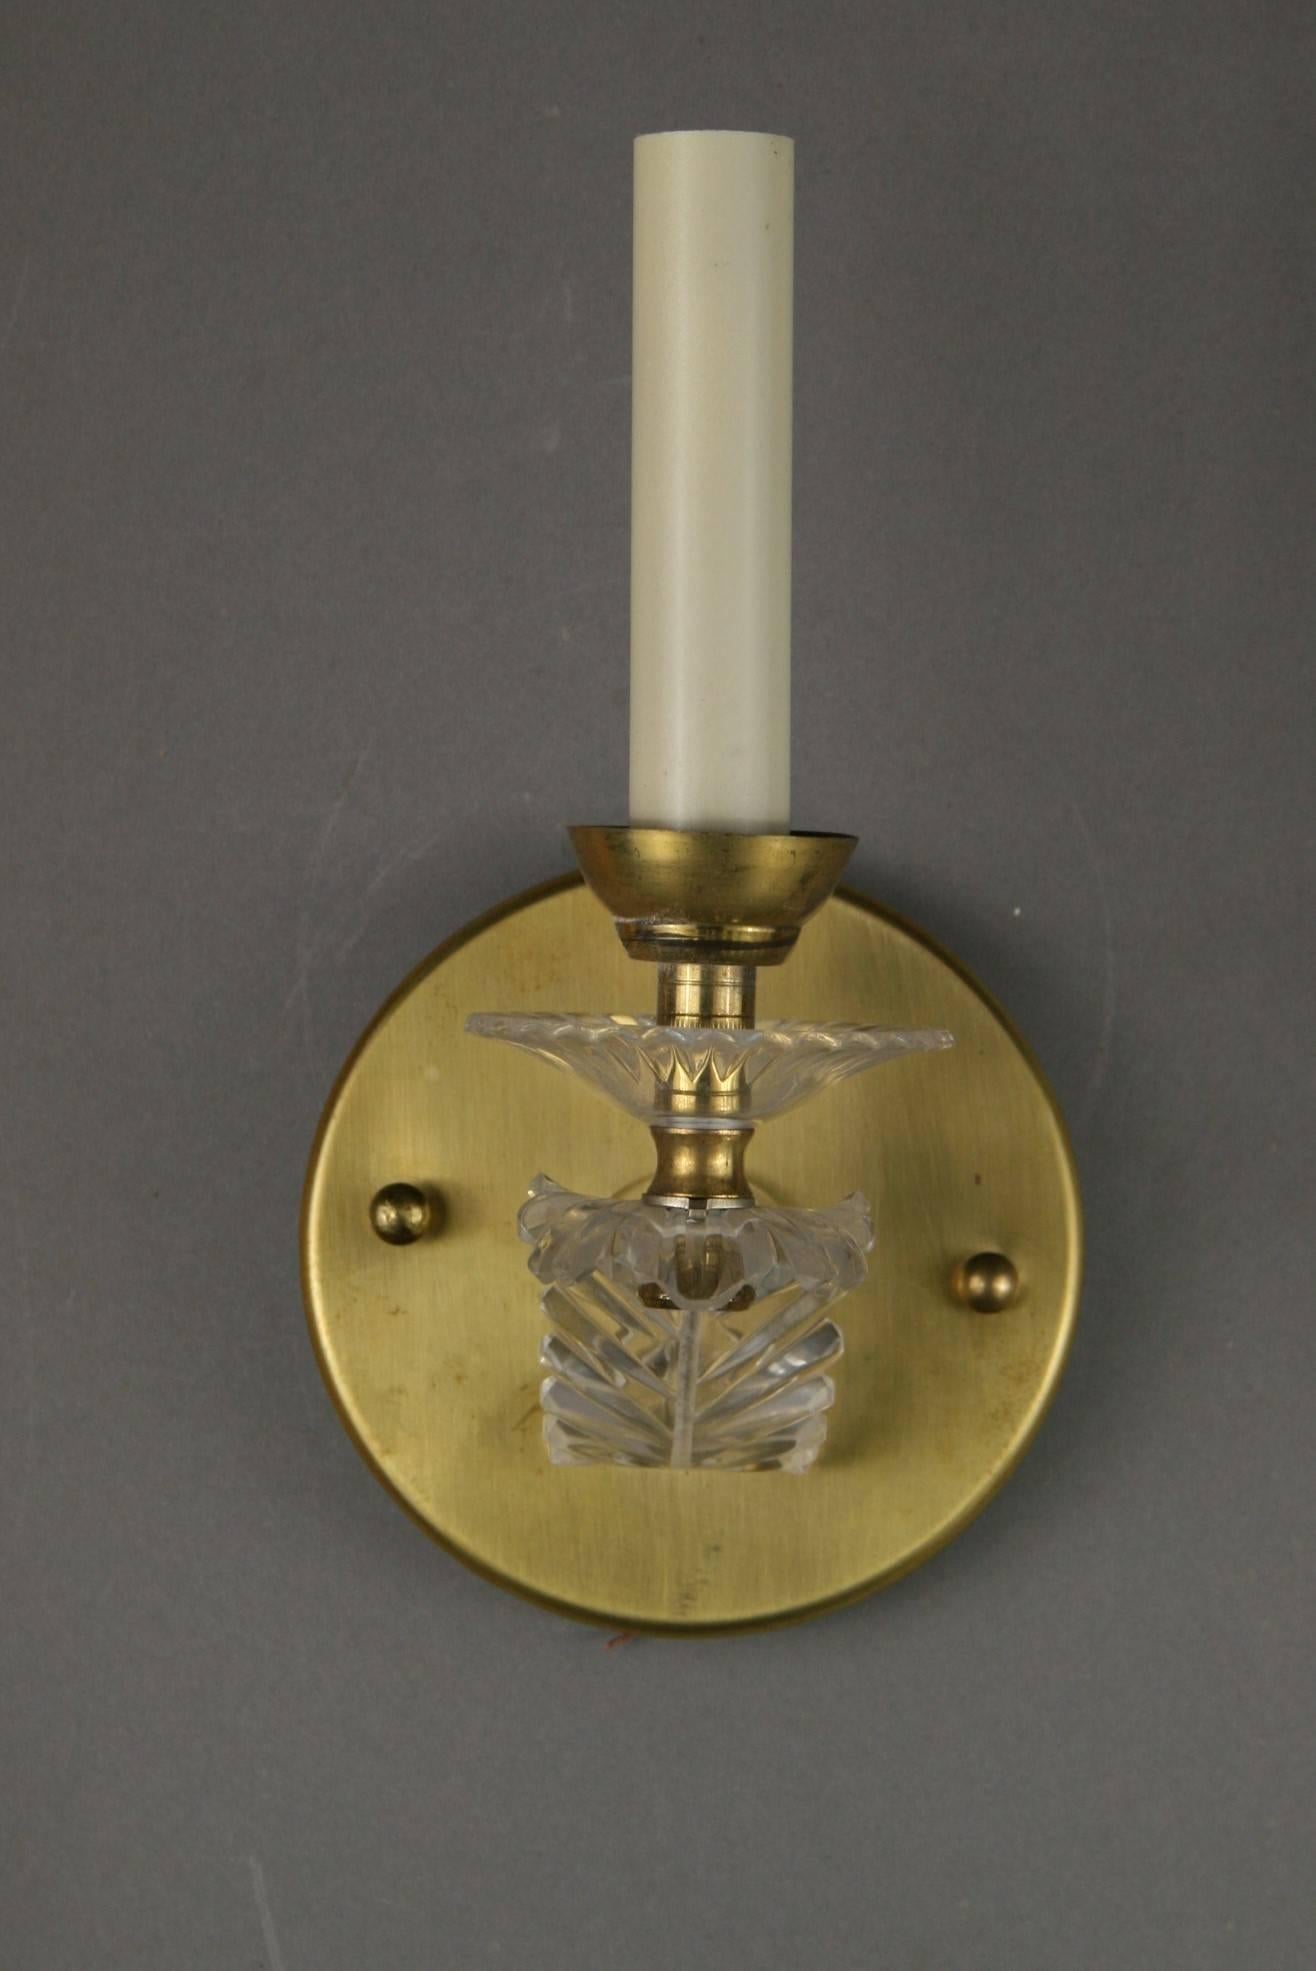 1-4062 pair of French brass and acrylic sconces
Takes 60 watt candelabra base bulb

 